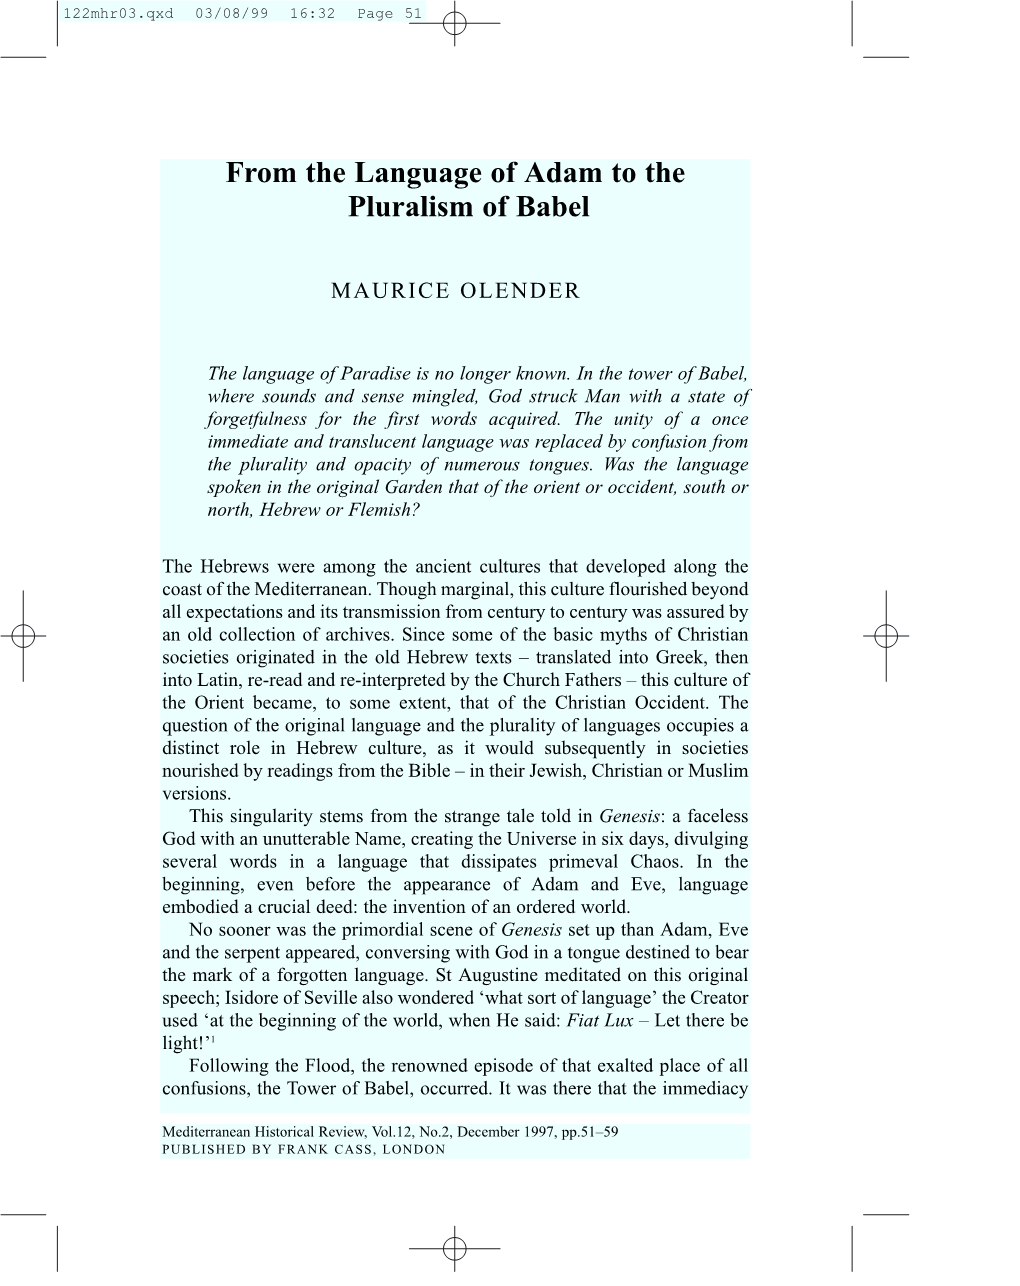 From the Language of Adam to the Pluralism of Babel